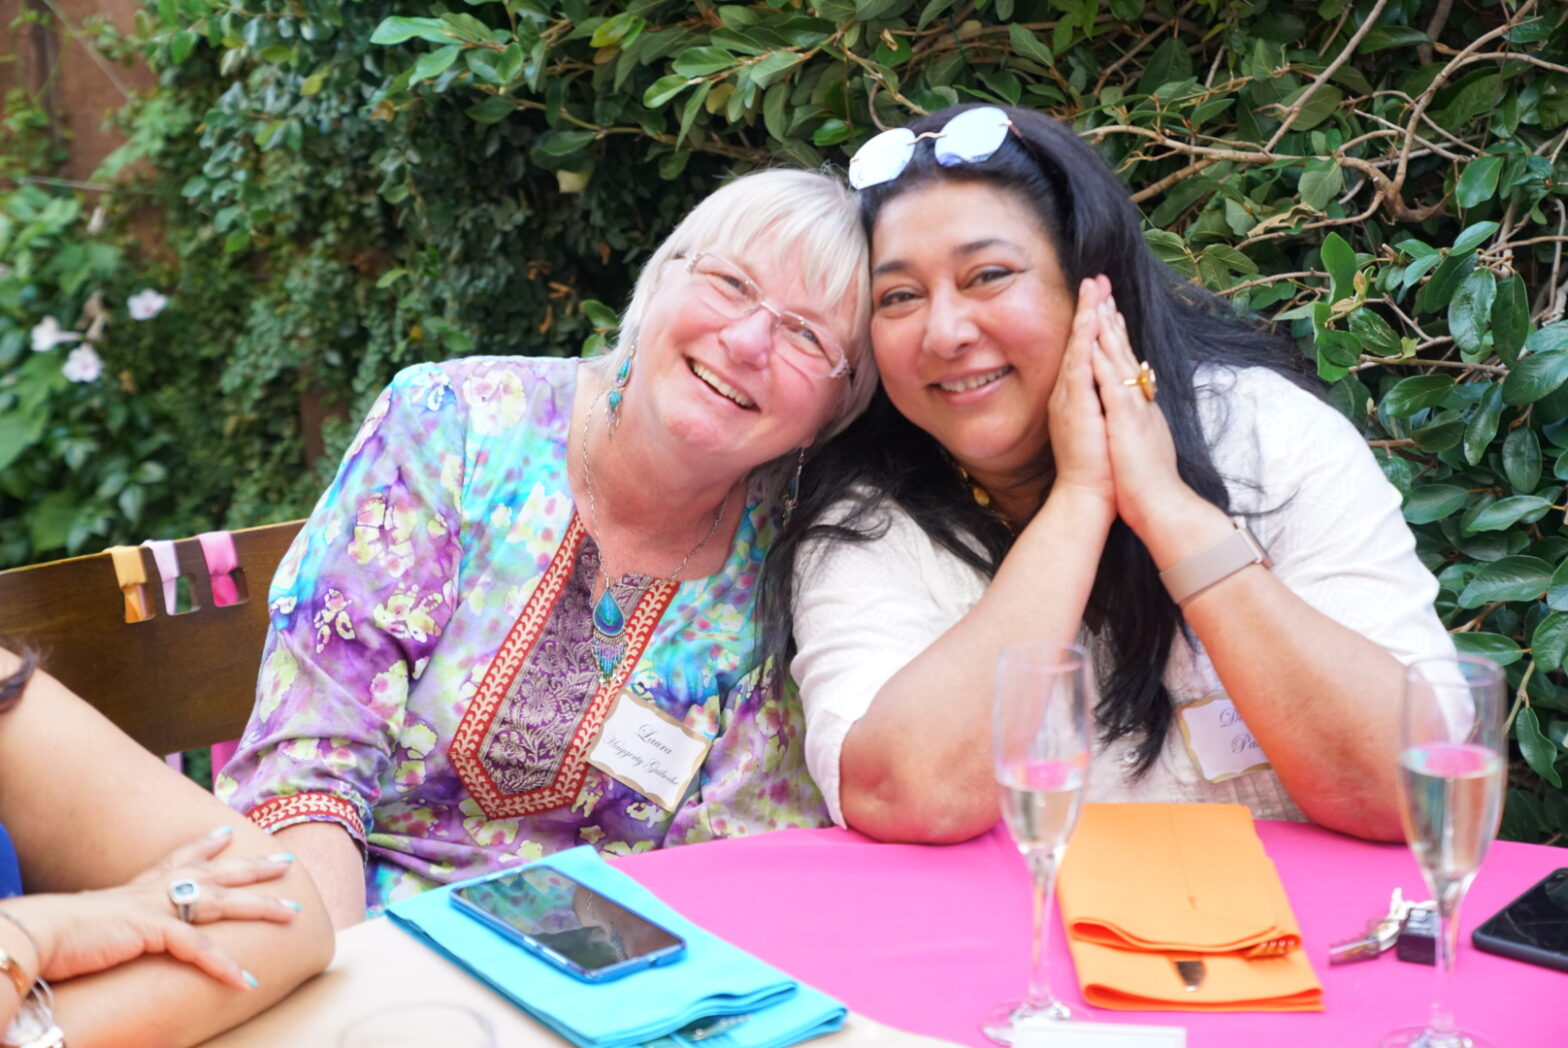 A Canadian woman with short white hair and an Indian woman with long black hair sitting at a table, leaning their heads together and smiling like the old friends they are